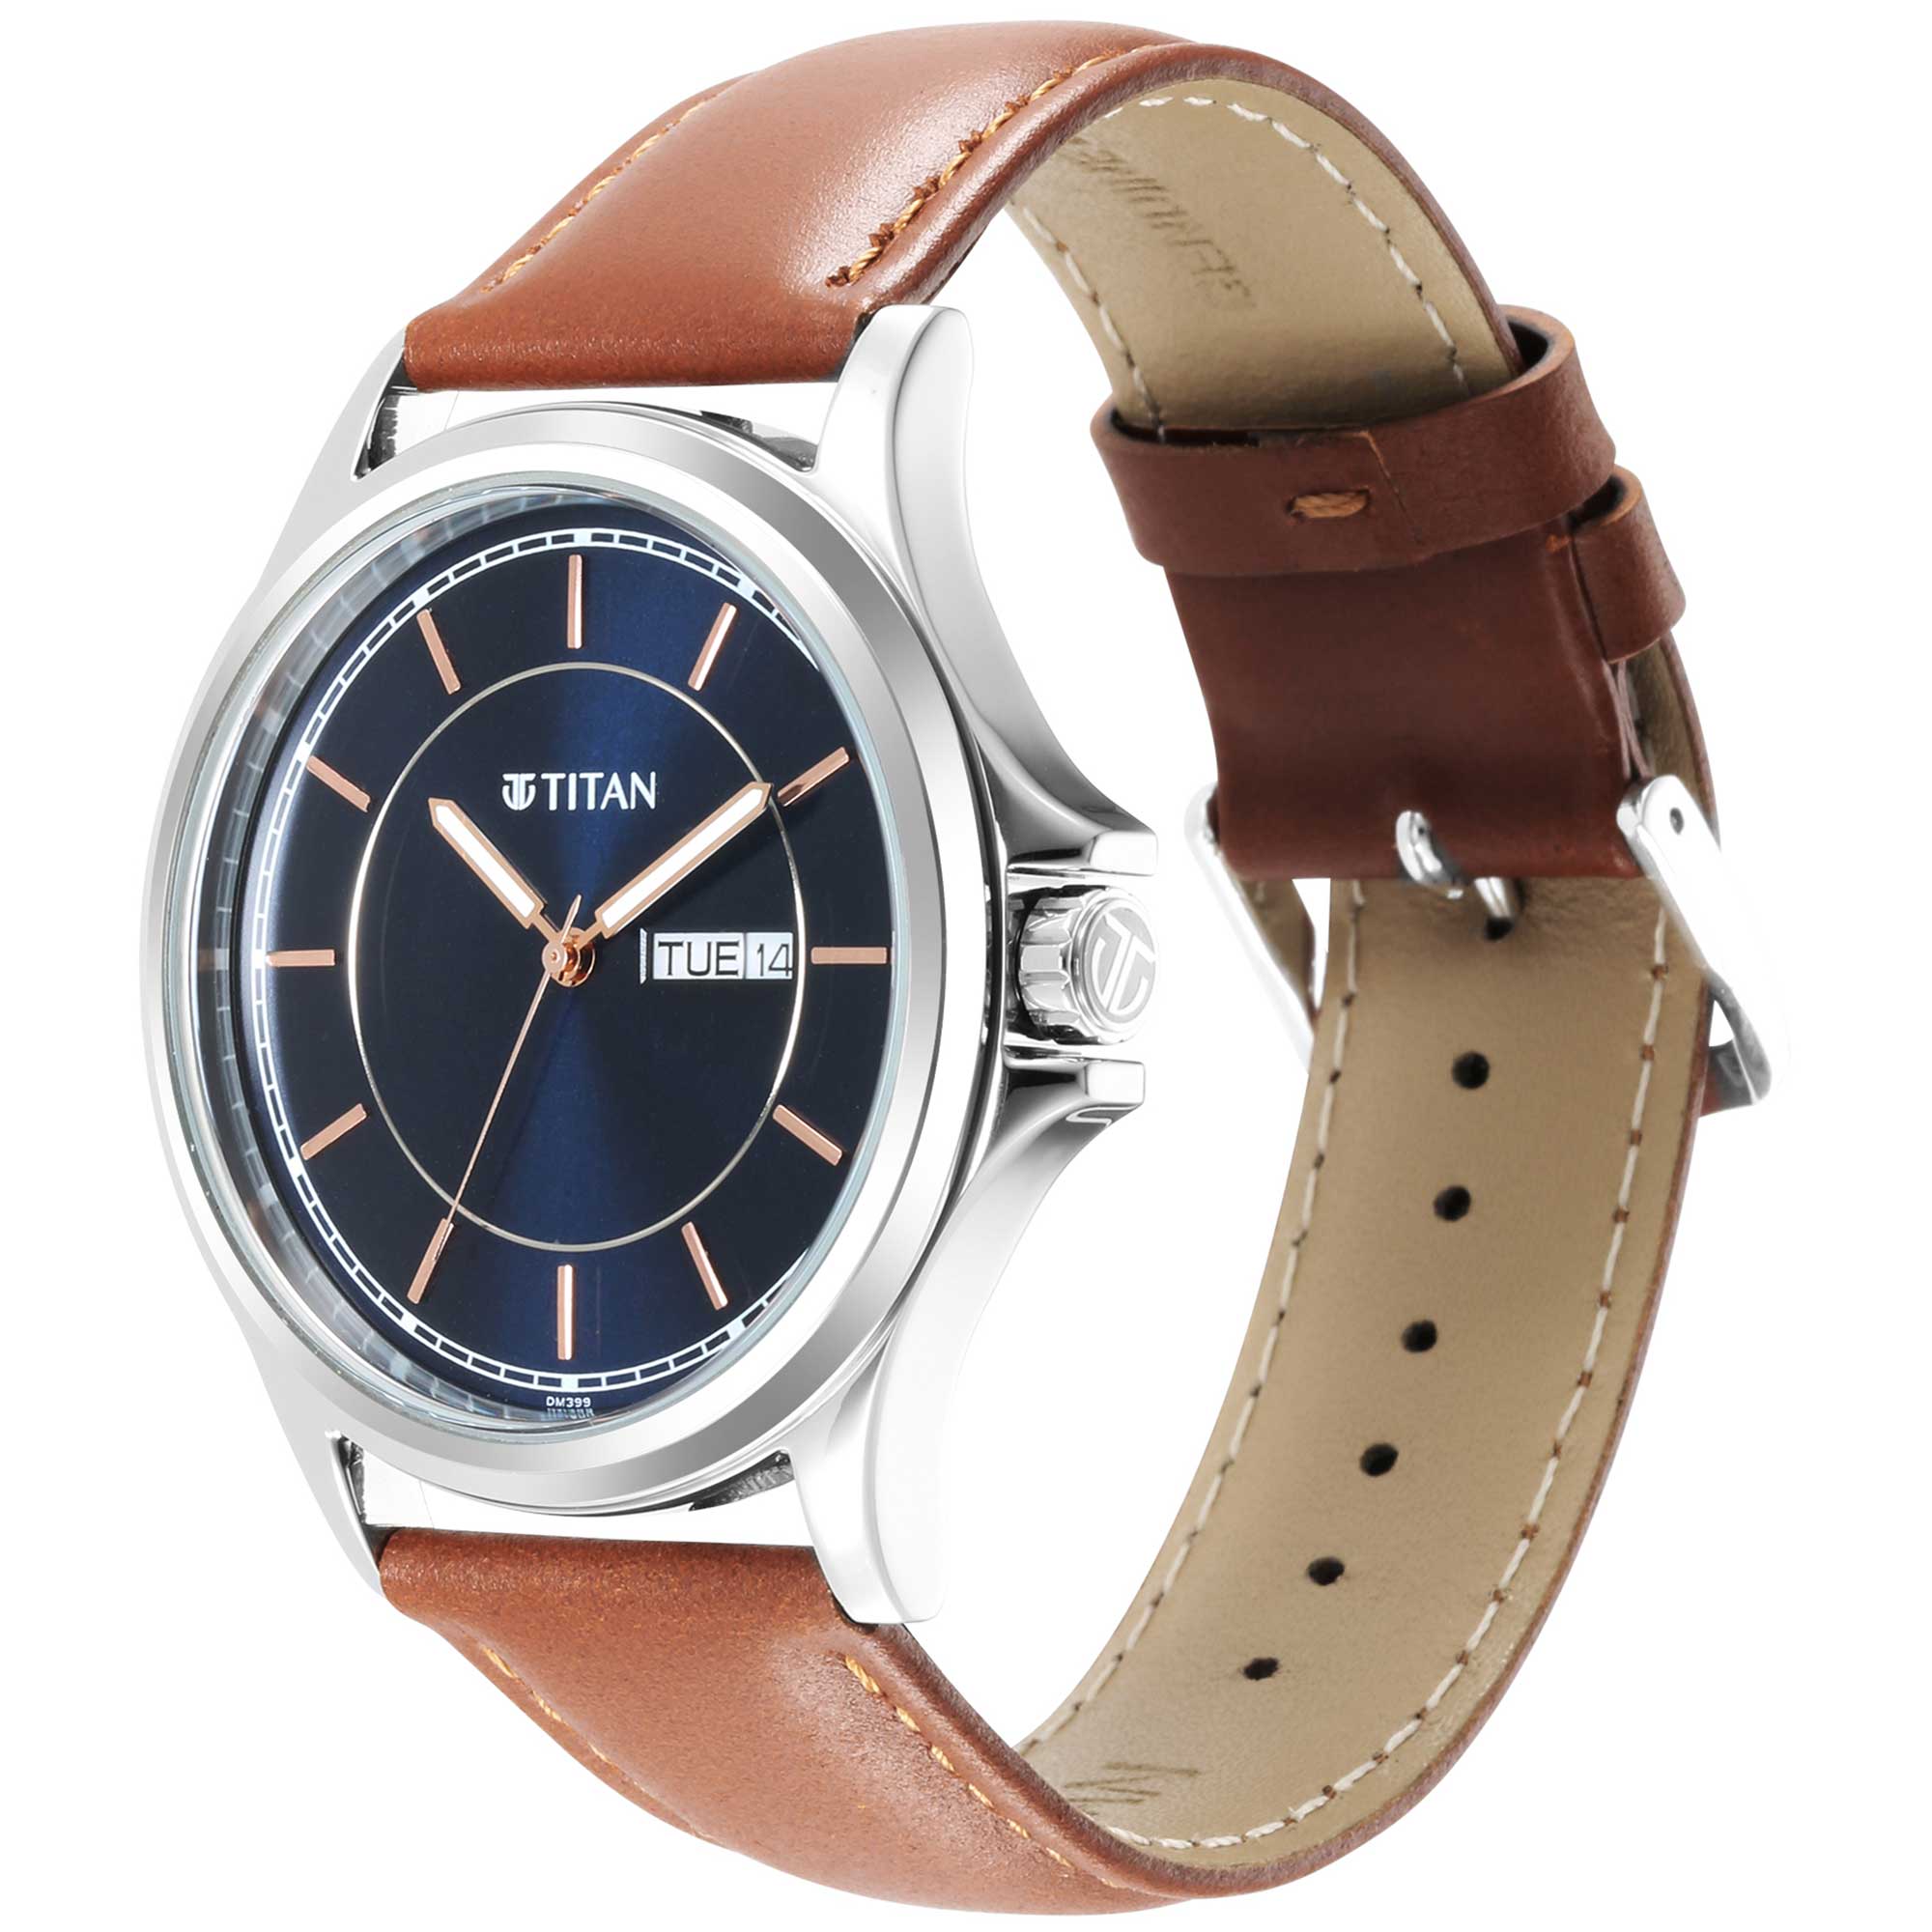 Titan Trendsetters Blue Dial Analog Leather Strap watch for Men